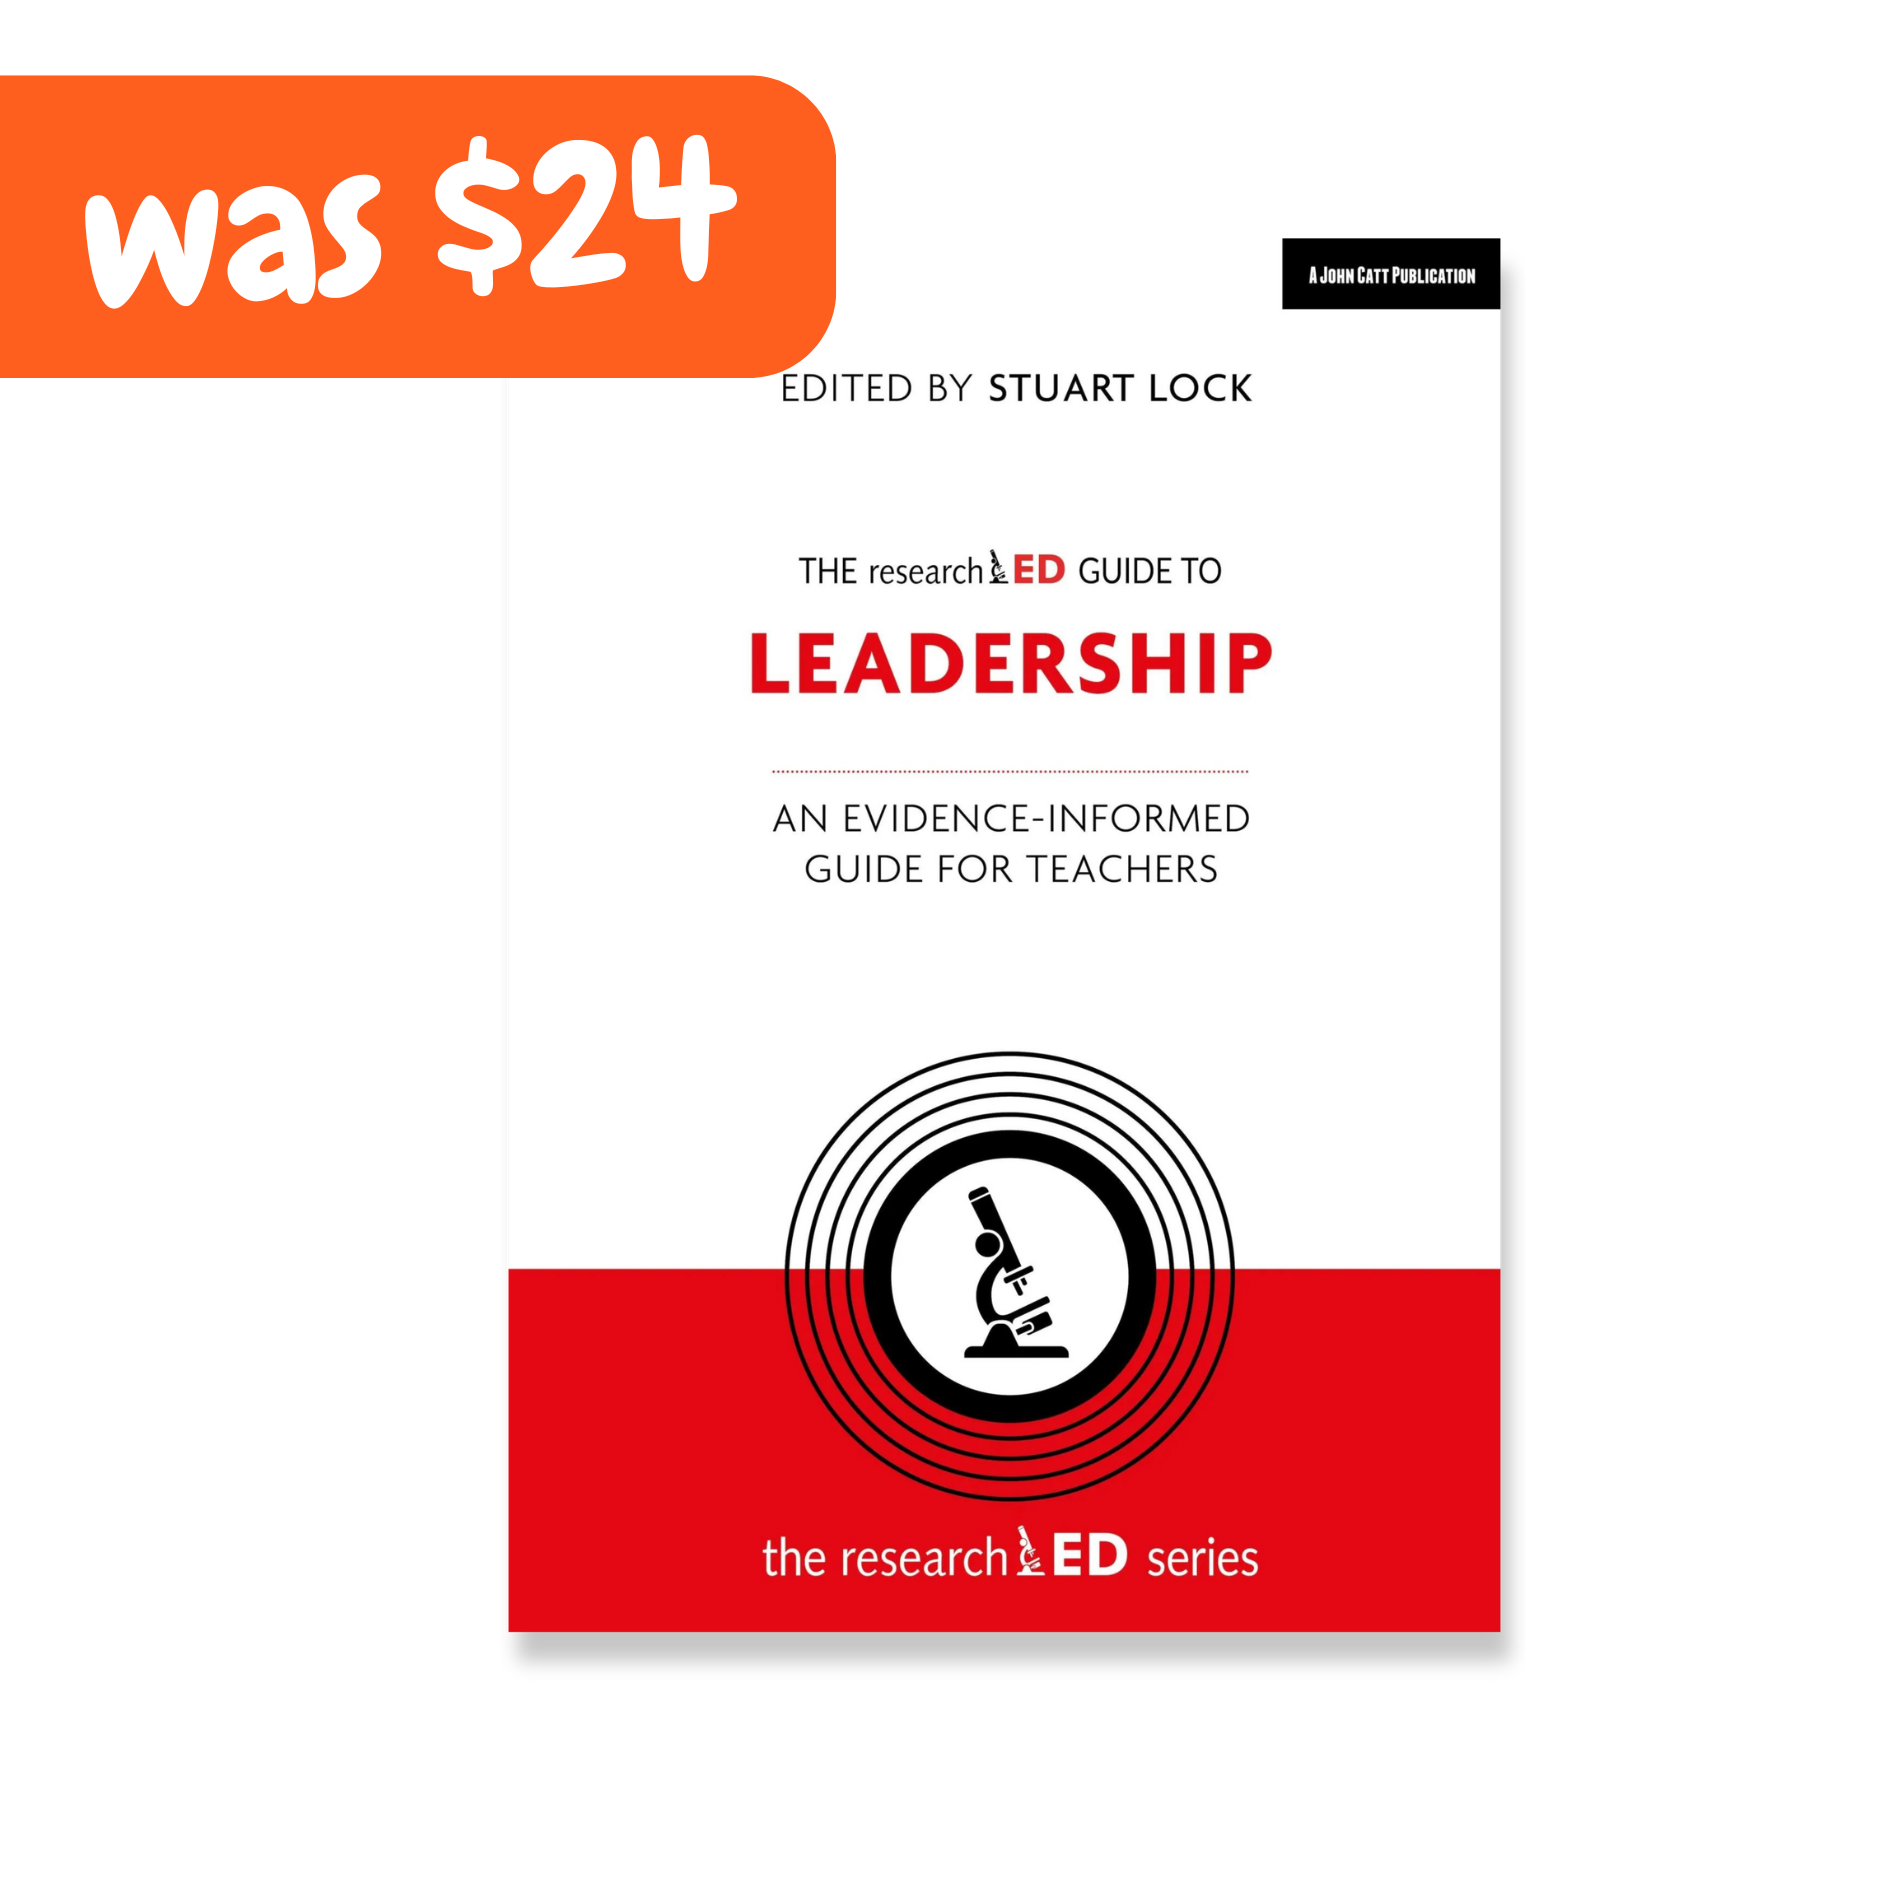 The researchED guide to Leadership